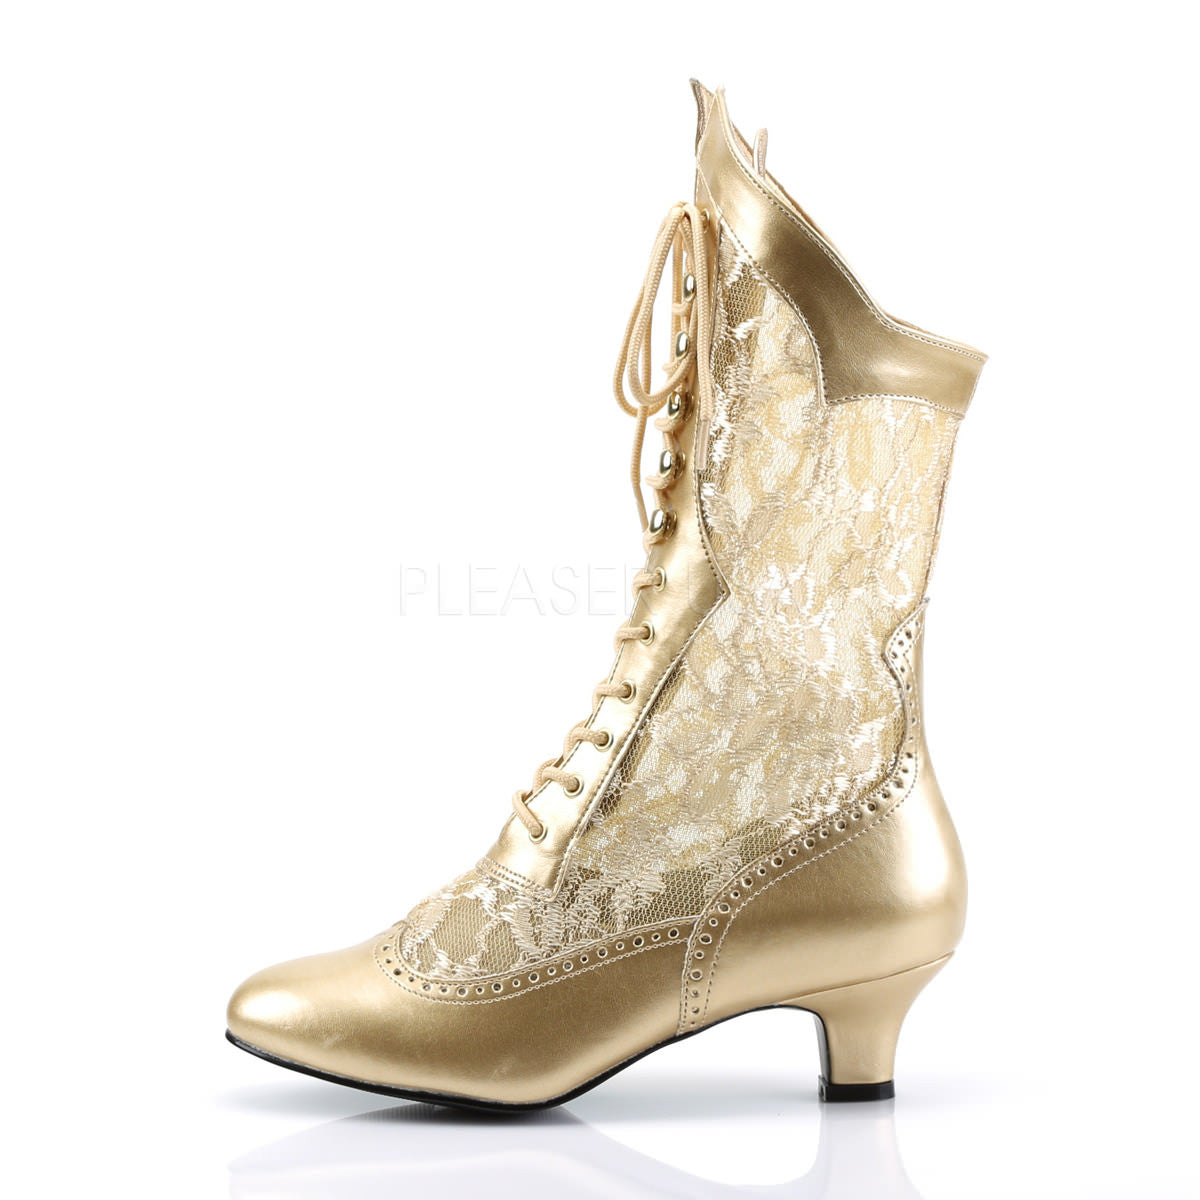 Lace Victorian Tall Boots in Gold Pu | FUNTASMA DAME-115 – Shoecup.com